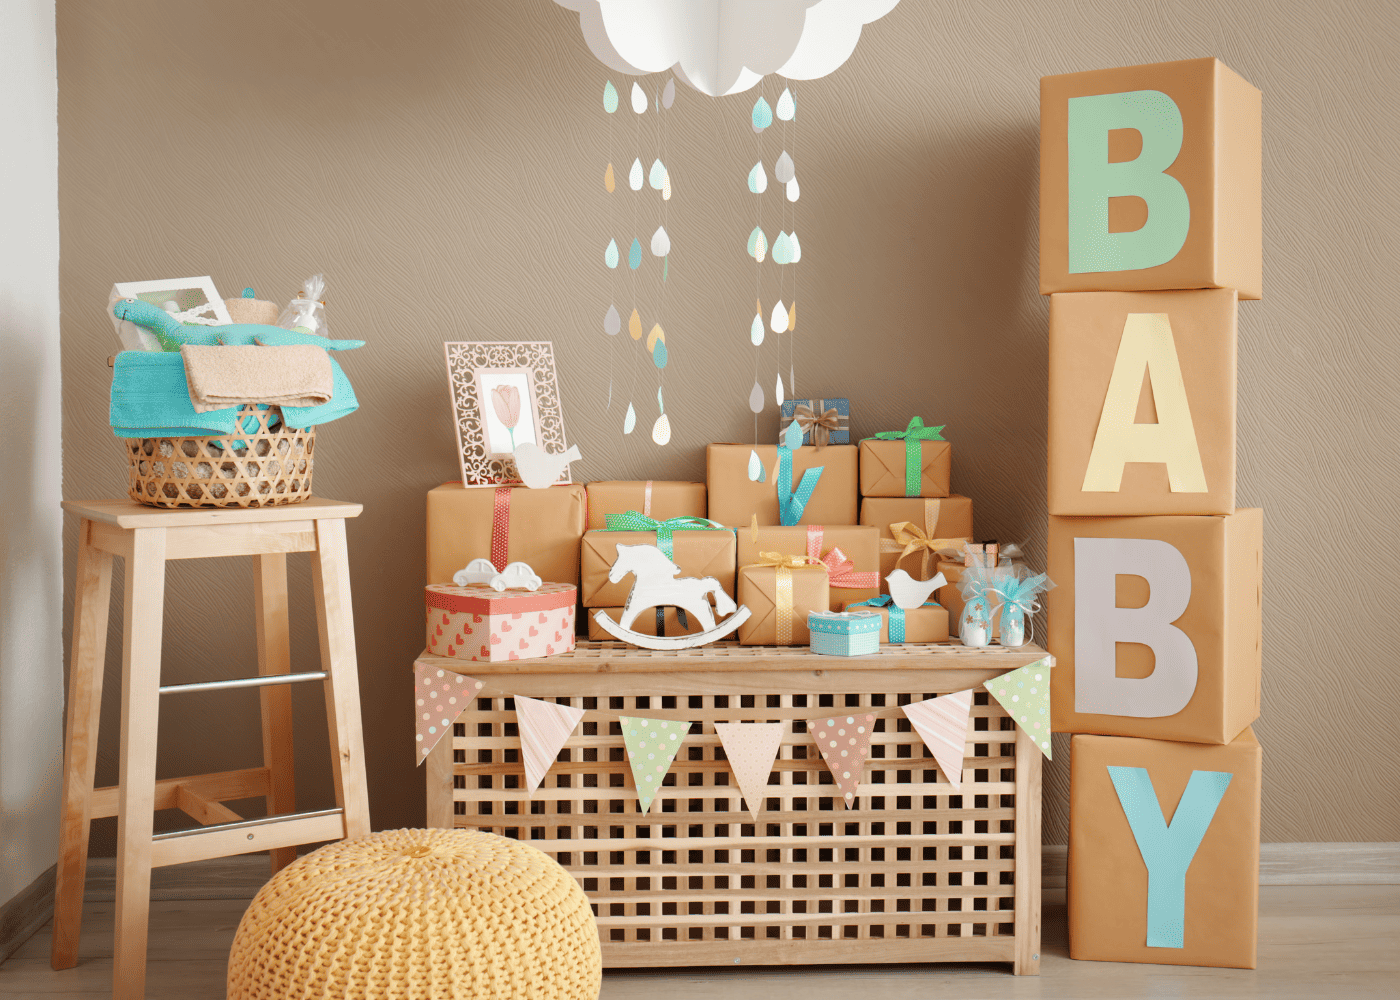 A table of presents at a baby shower with boxes on the right that spell "baby. "